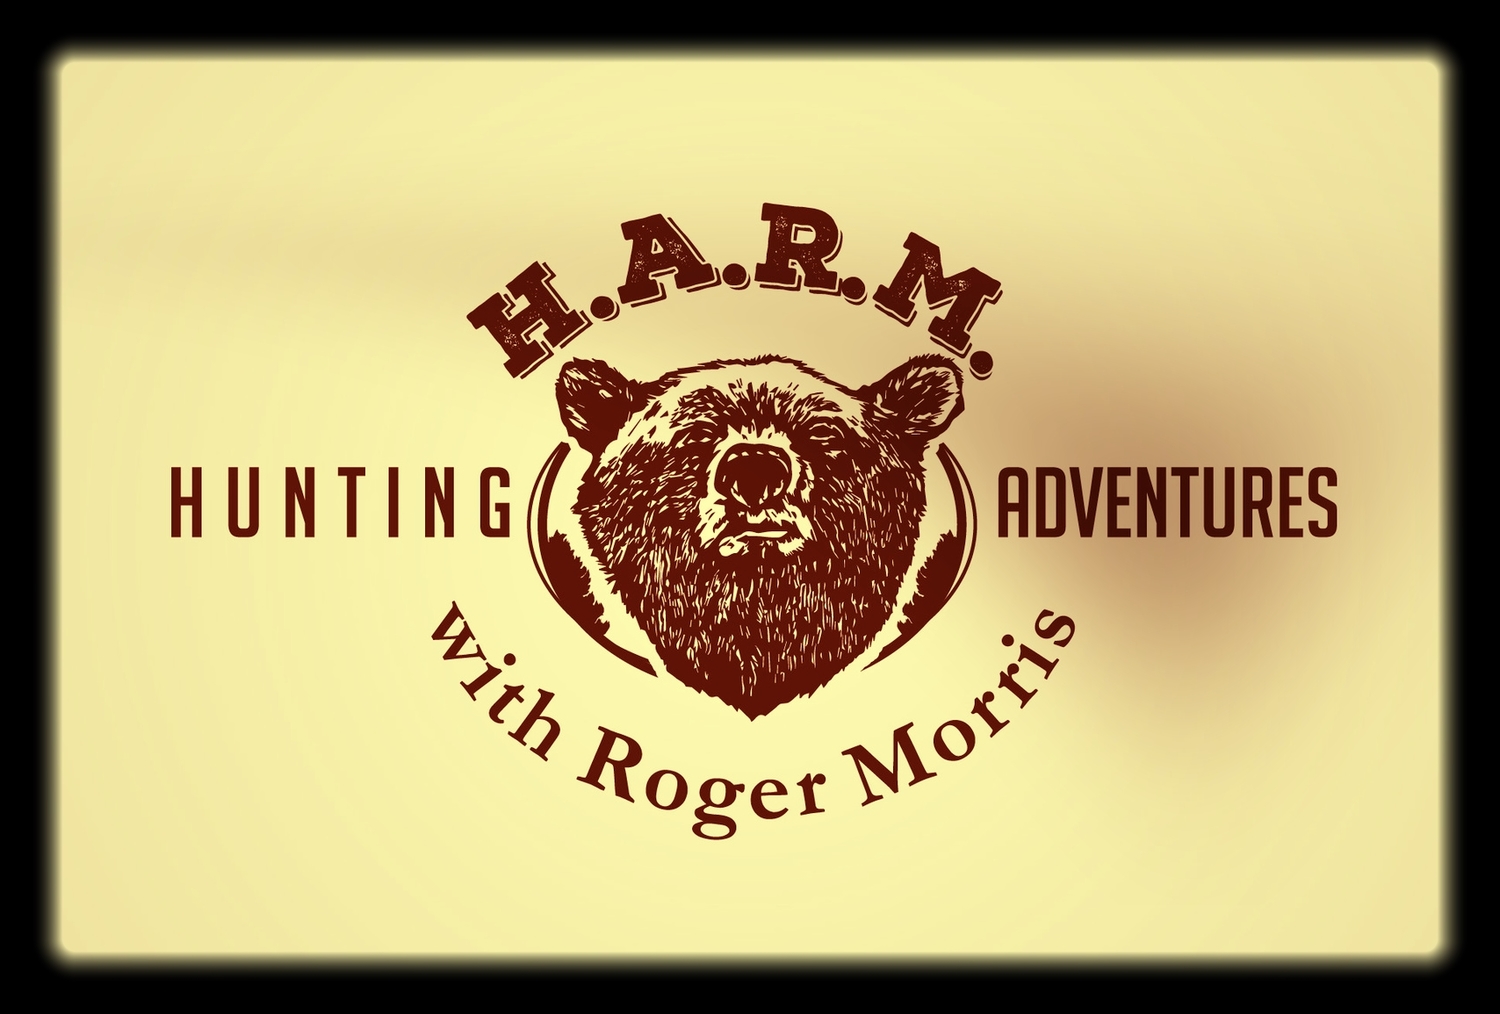 Hunting Adventures with Roger Morris